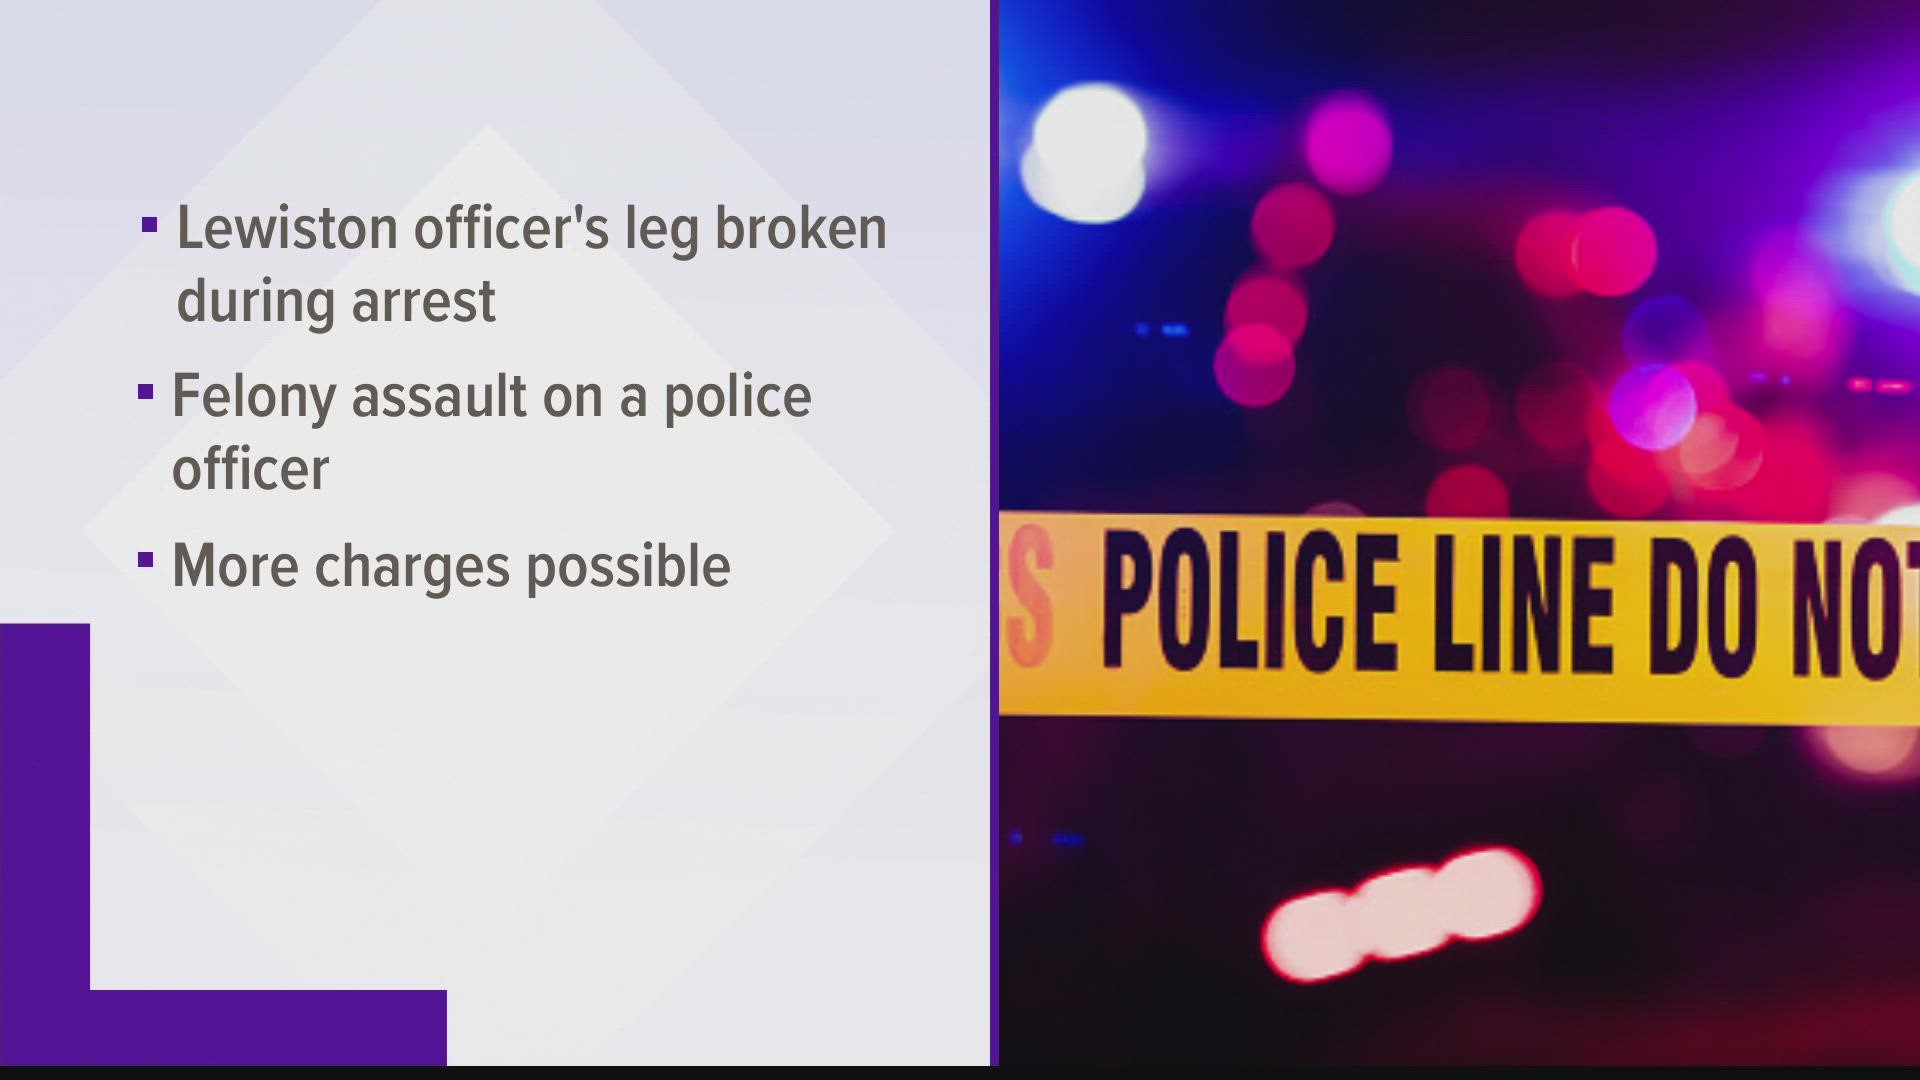 A police officer in Lewiston breaks his leg while making an arrest